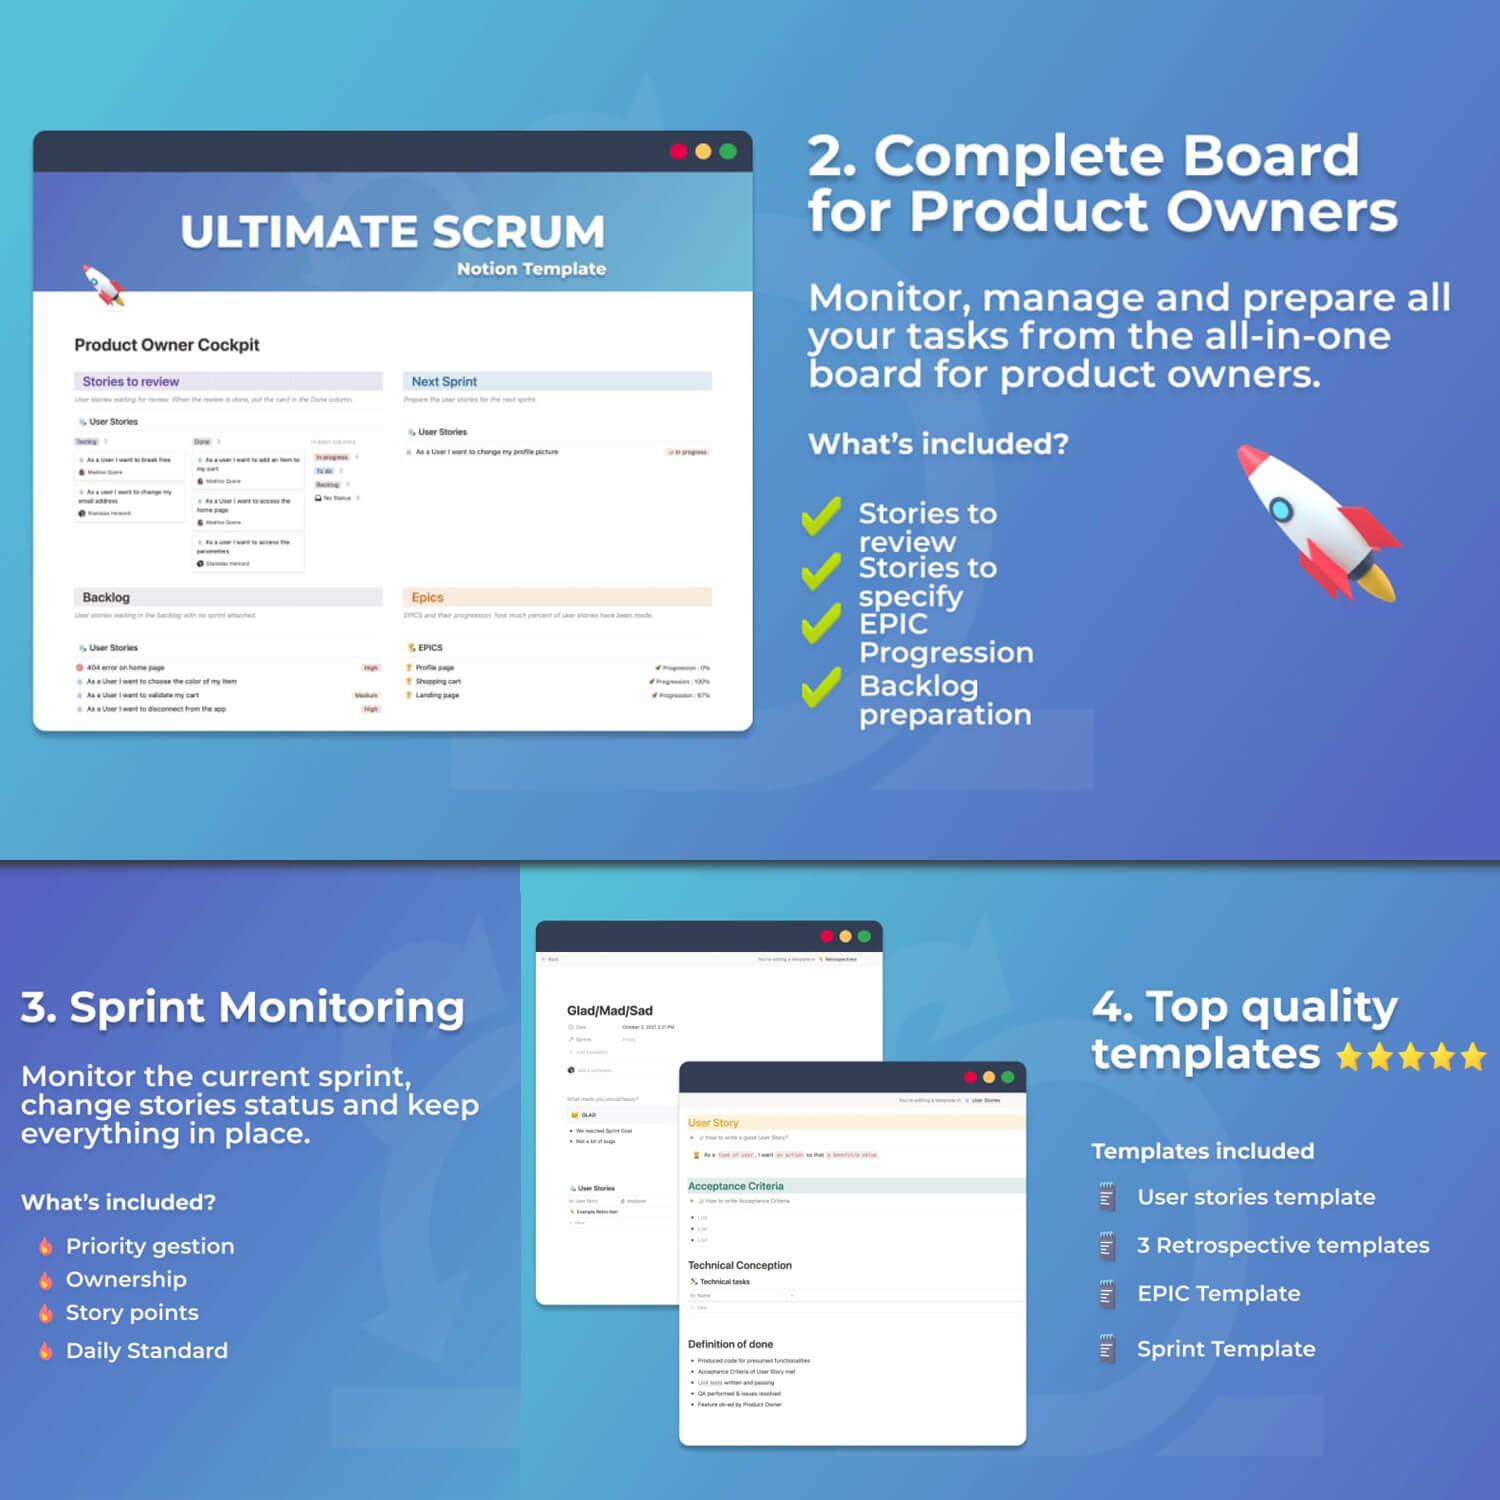 What's included Sprint Monitoring, Top quality template and complete board for product owners.